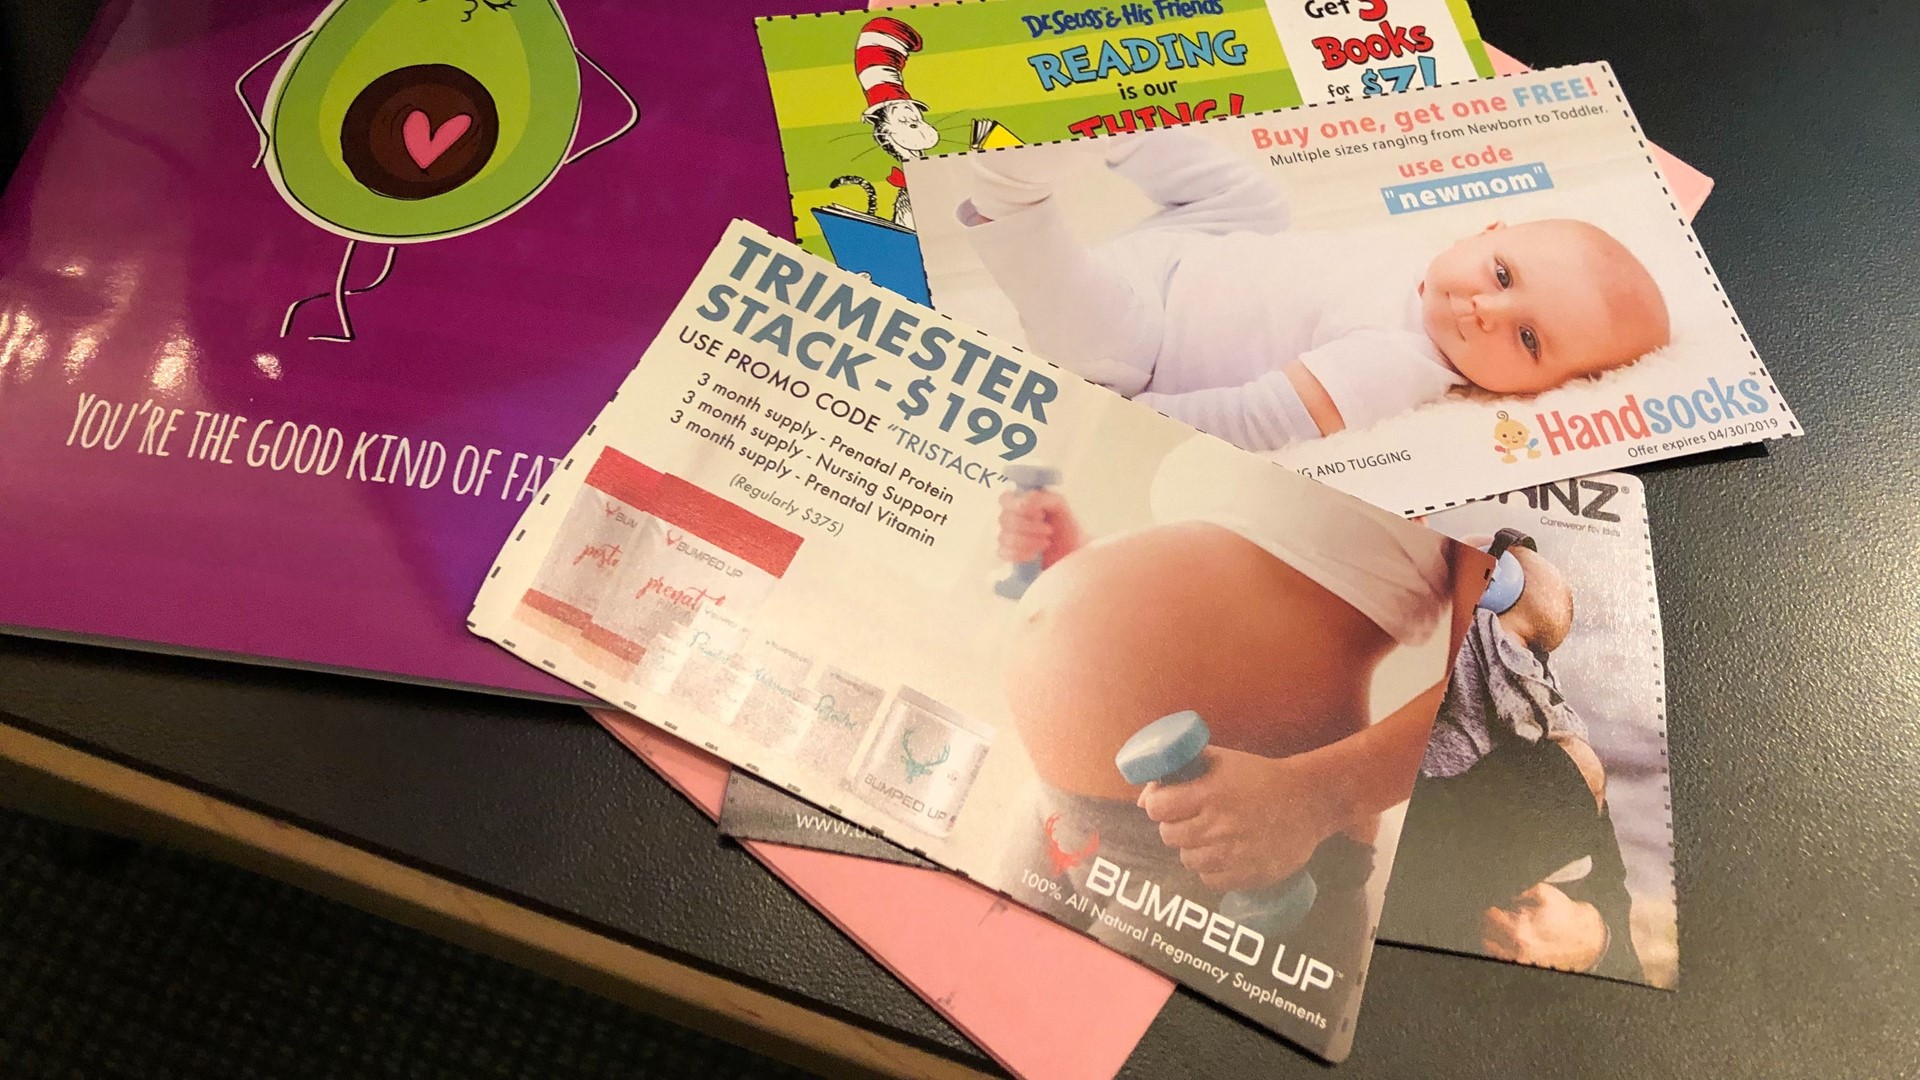 The BBB said consumers should be aware of baby and motherhood gift cards sent to them by a "Jenny B."